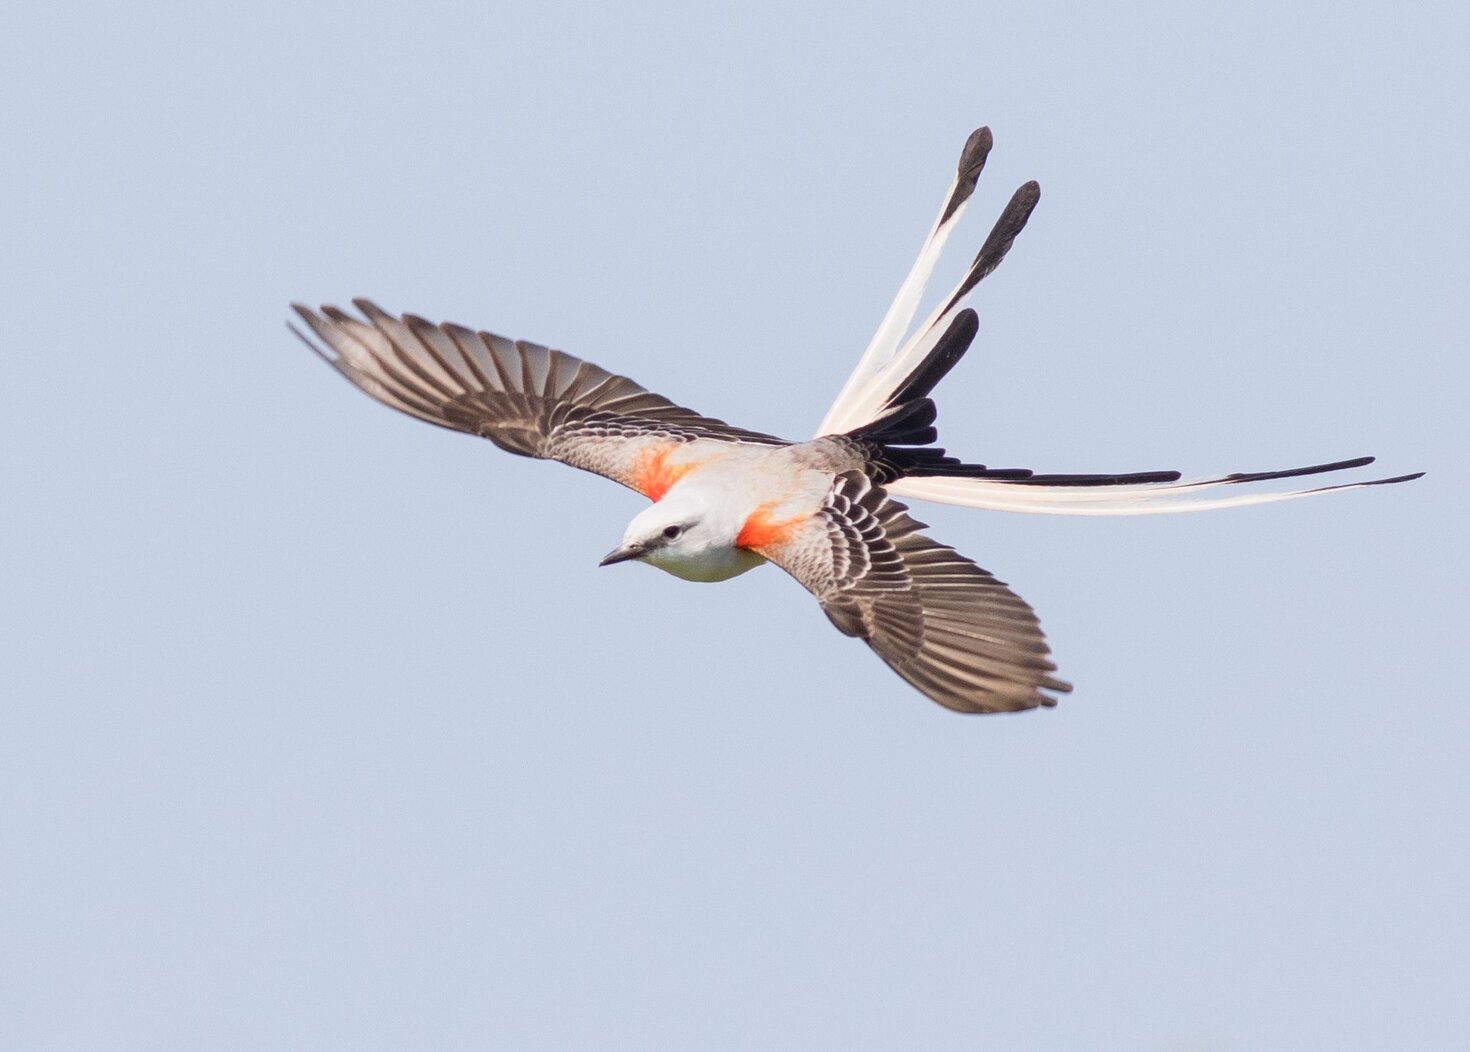 A Scissor-tailed Flycatcher was spotted in Calvert Vaux Park in 2017, only the second Brooklyn record; the first documented bird was recorded in1959.” Photo: Douglas Gochfeld